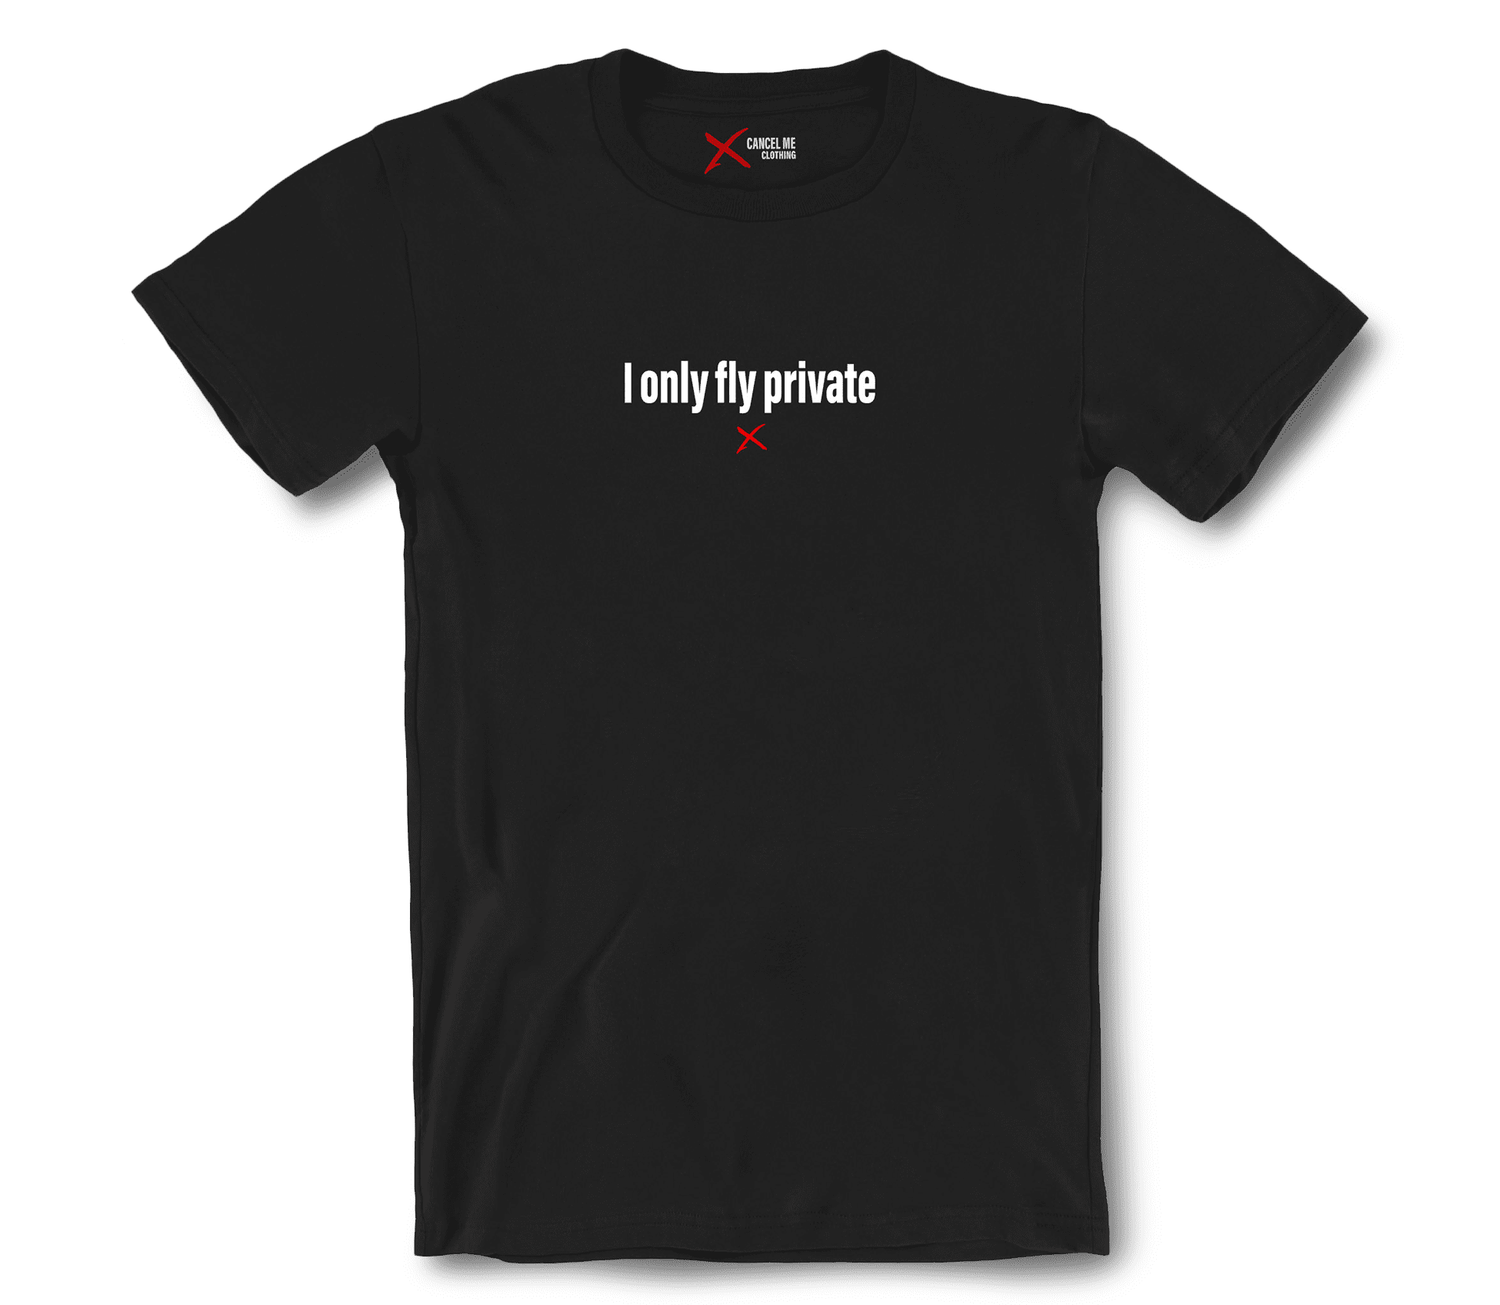 lp-travel_1-shirt_7791596306602_i-only-fly-private-shirt_Black.png